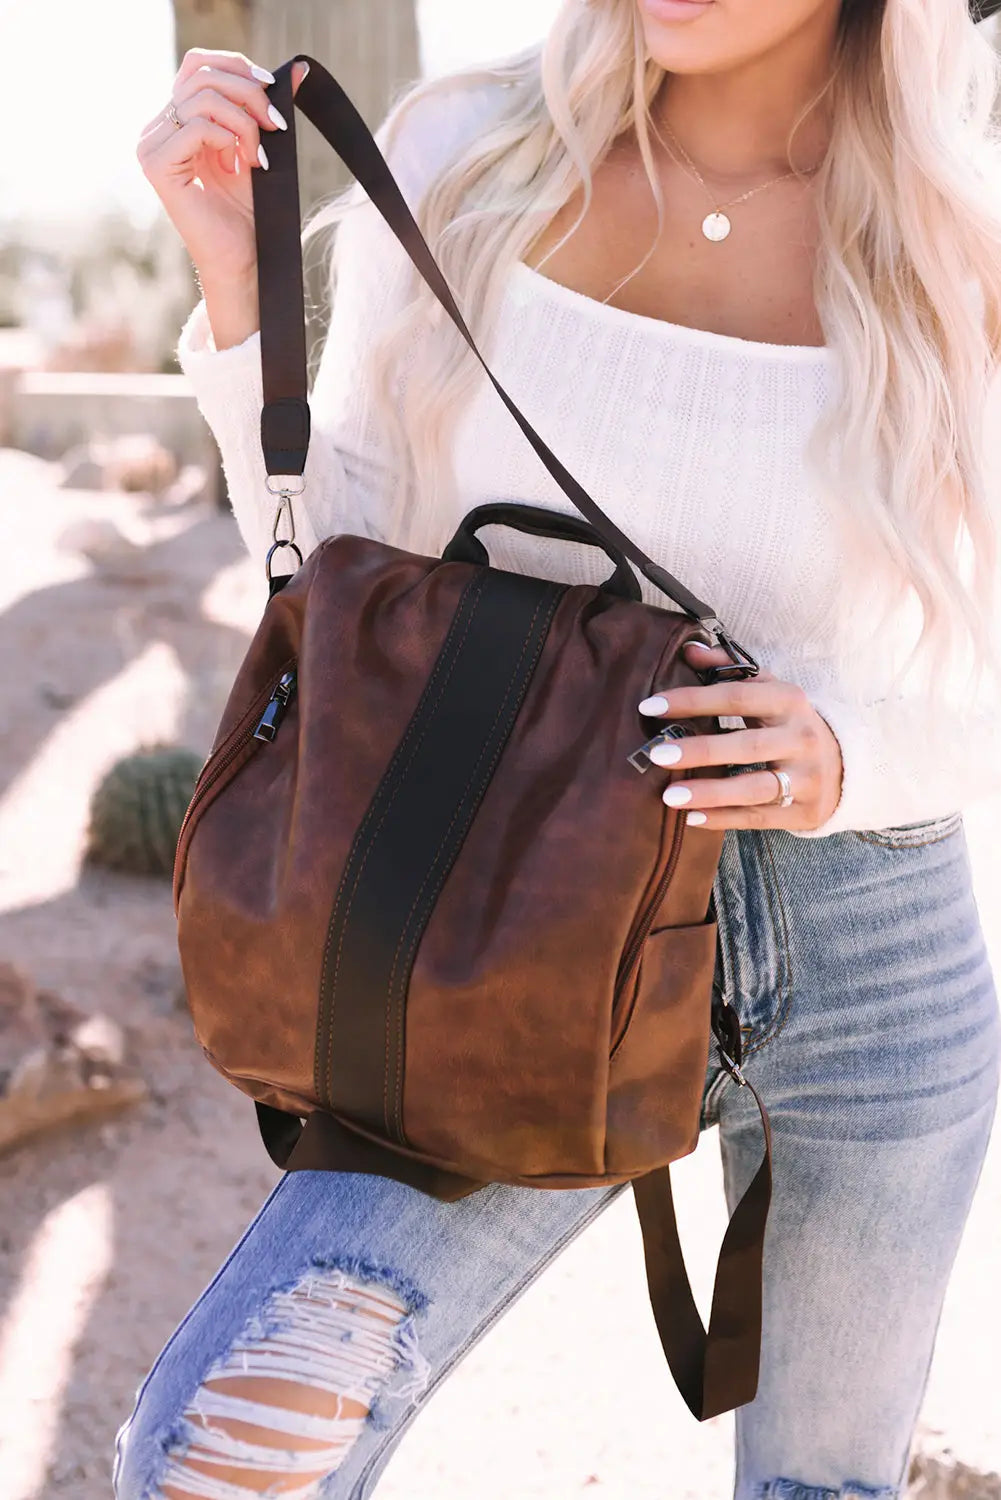 Brown multifunctional retro faux leather backpack - one size